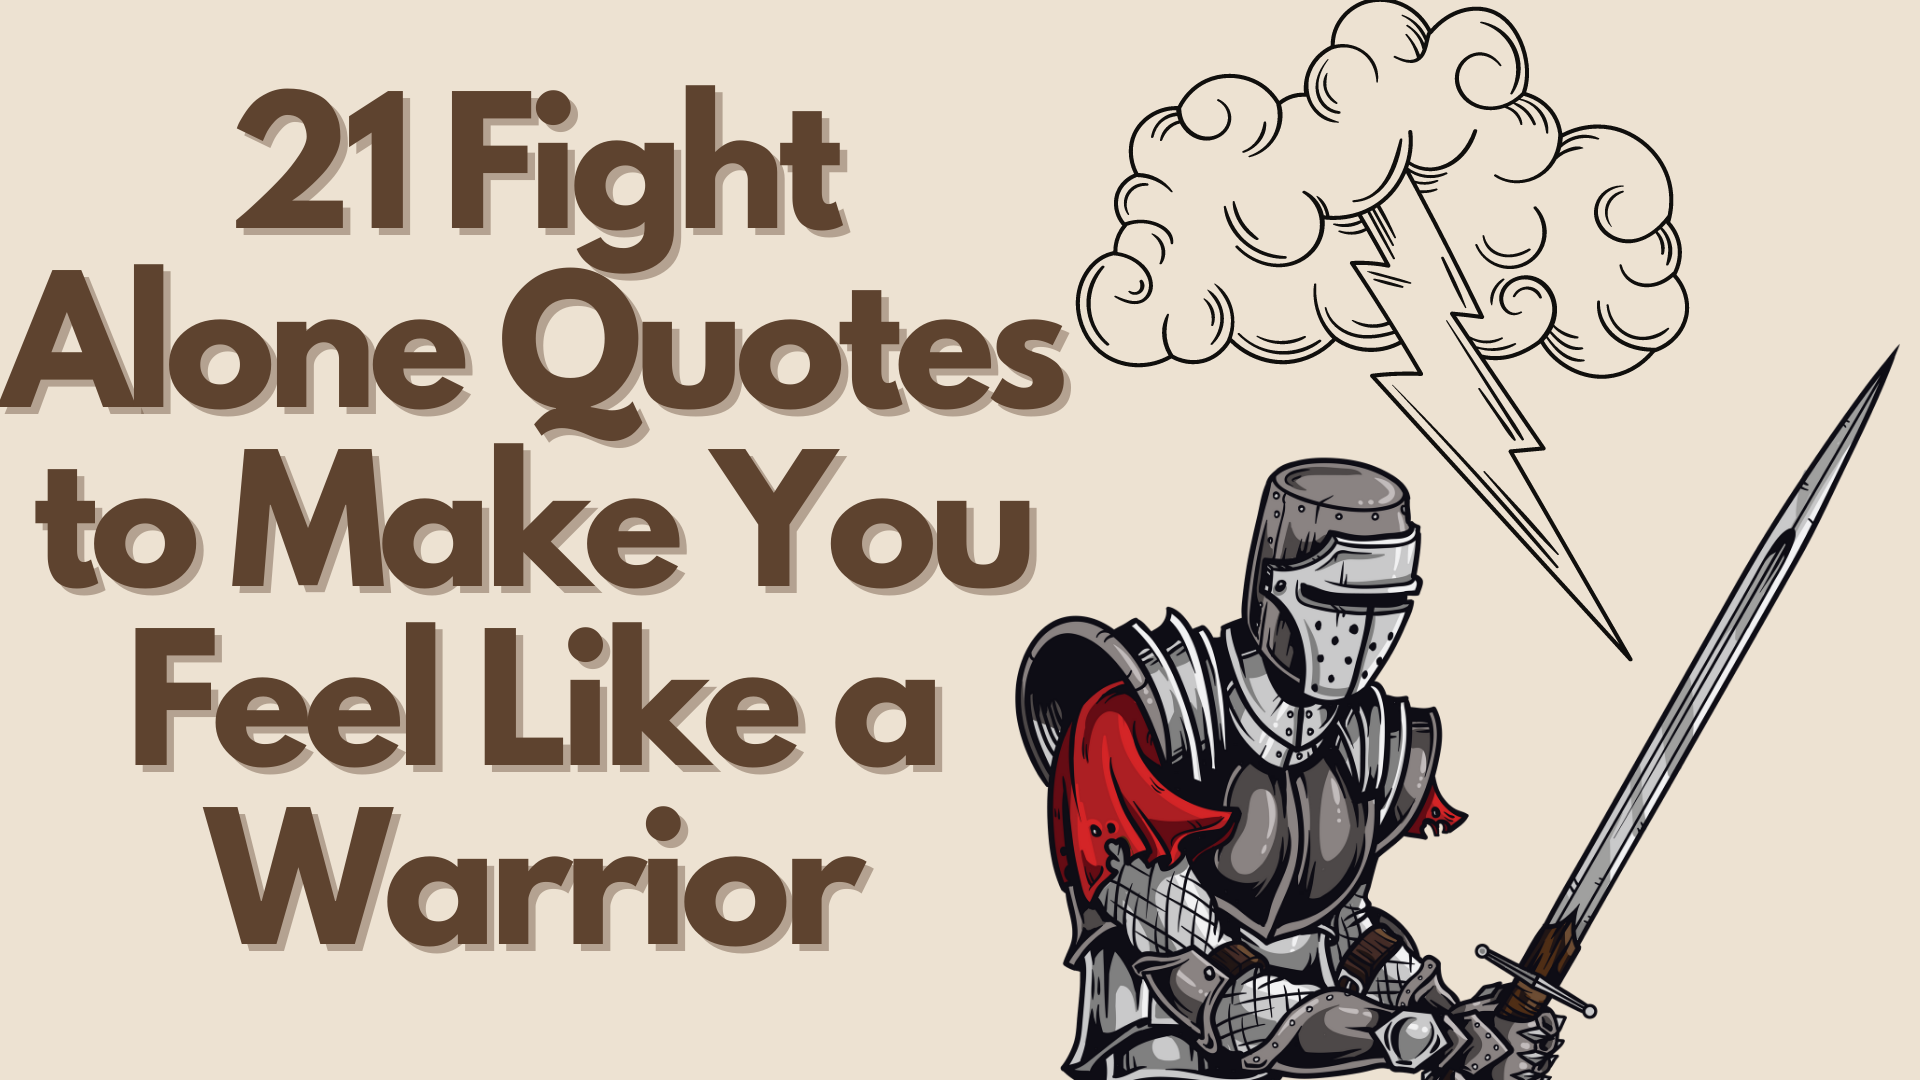 fight alone quotes